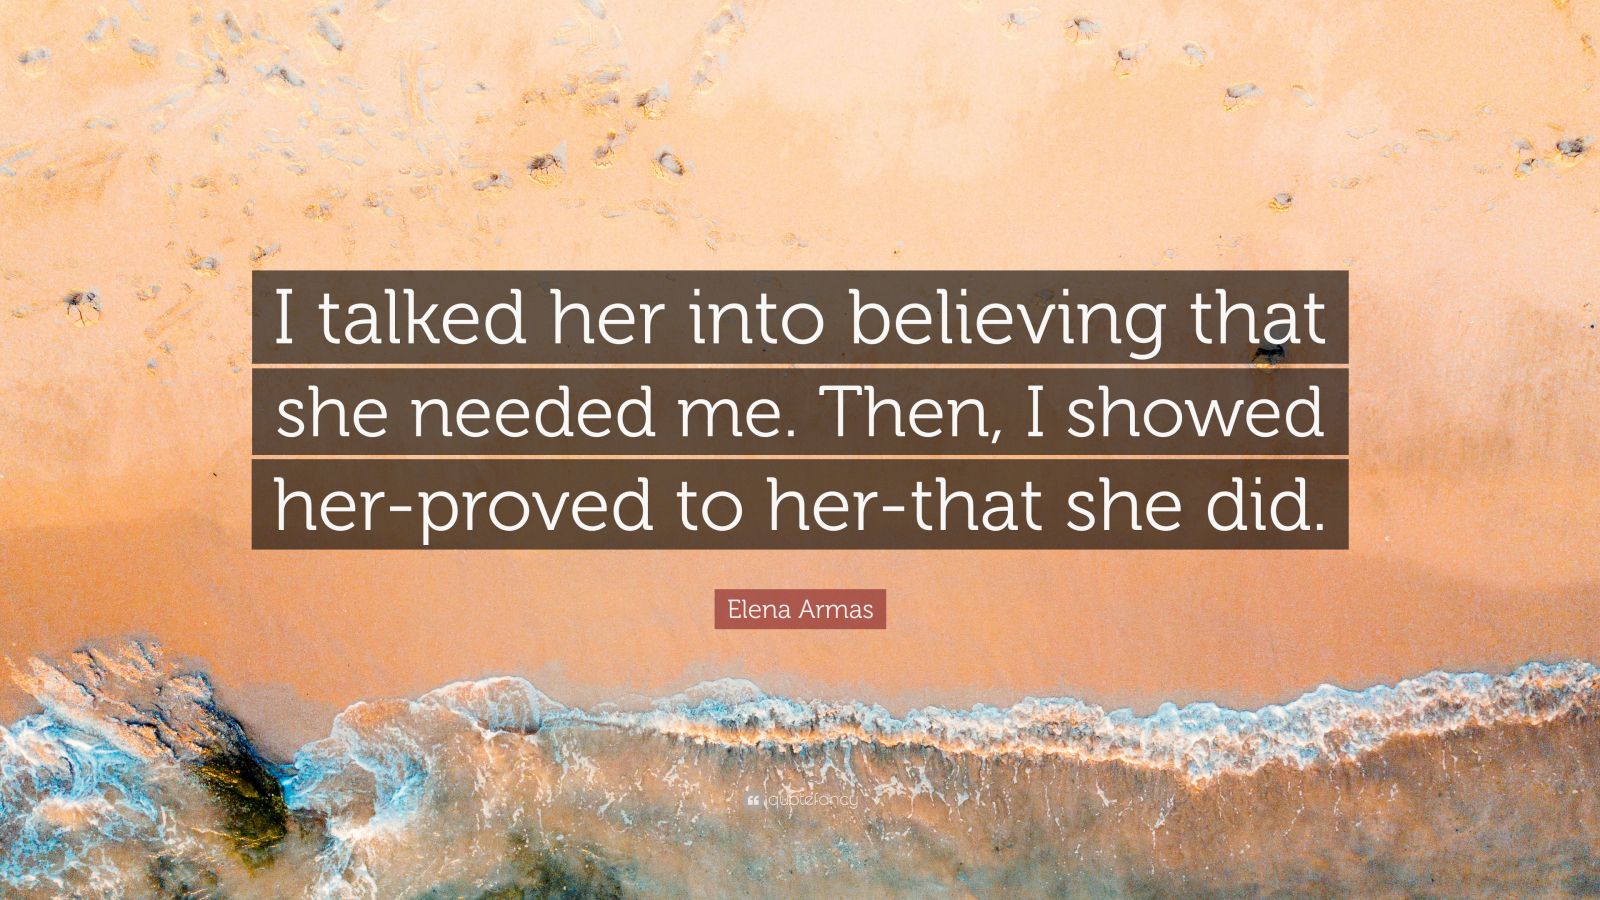 Elena Armas Quote: “I talked her into believing that she needed me ...